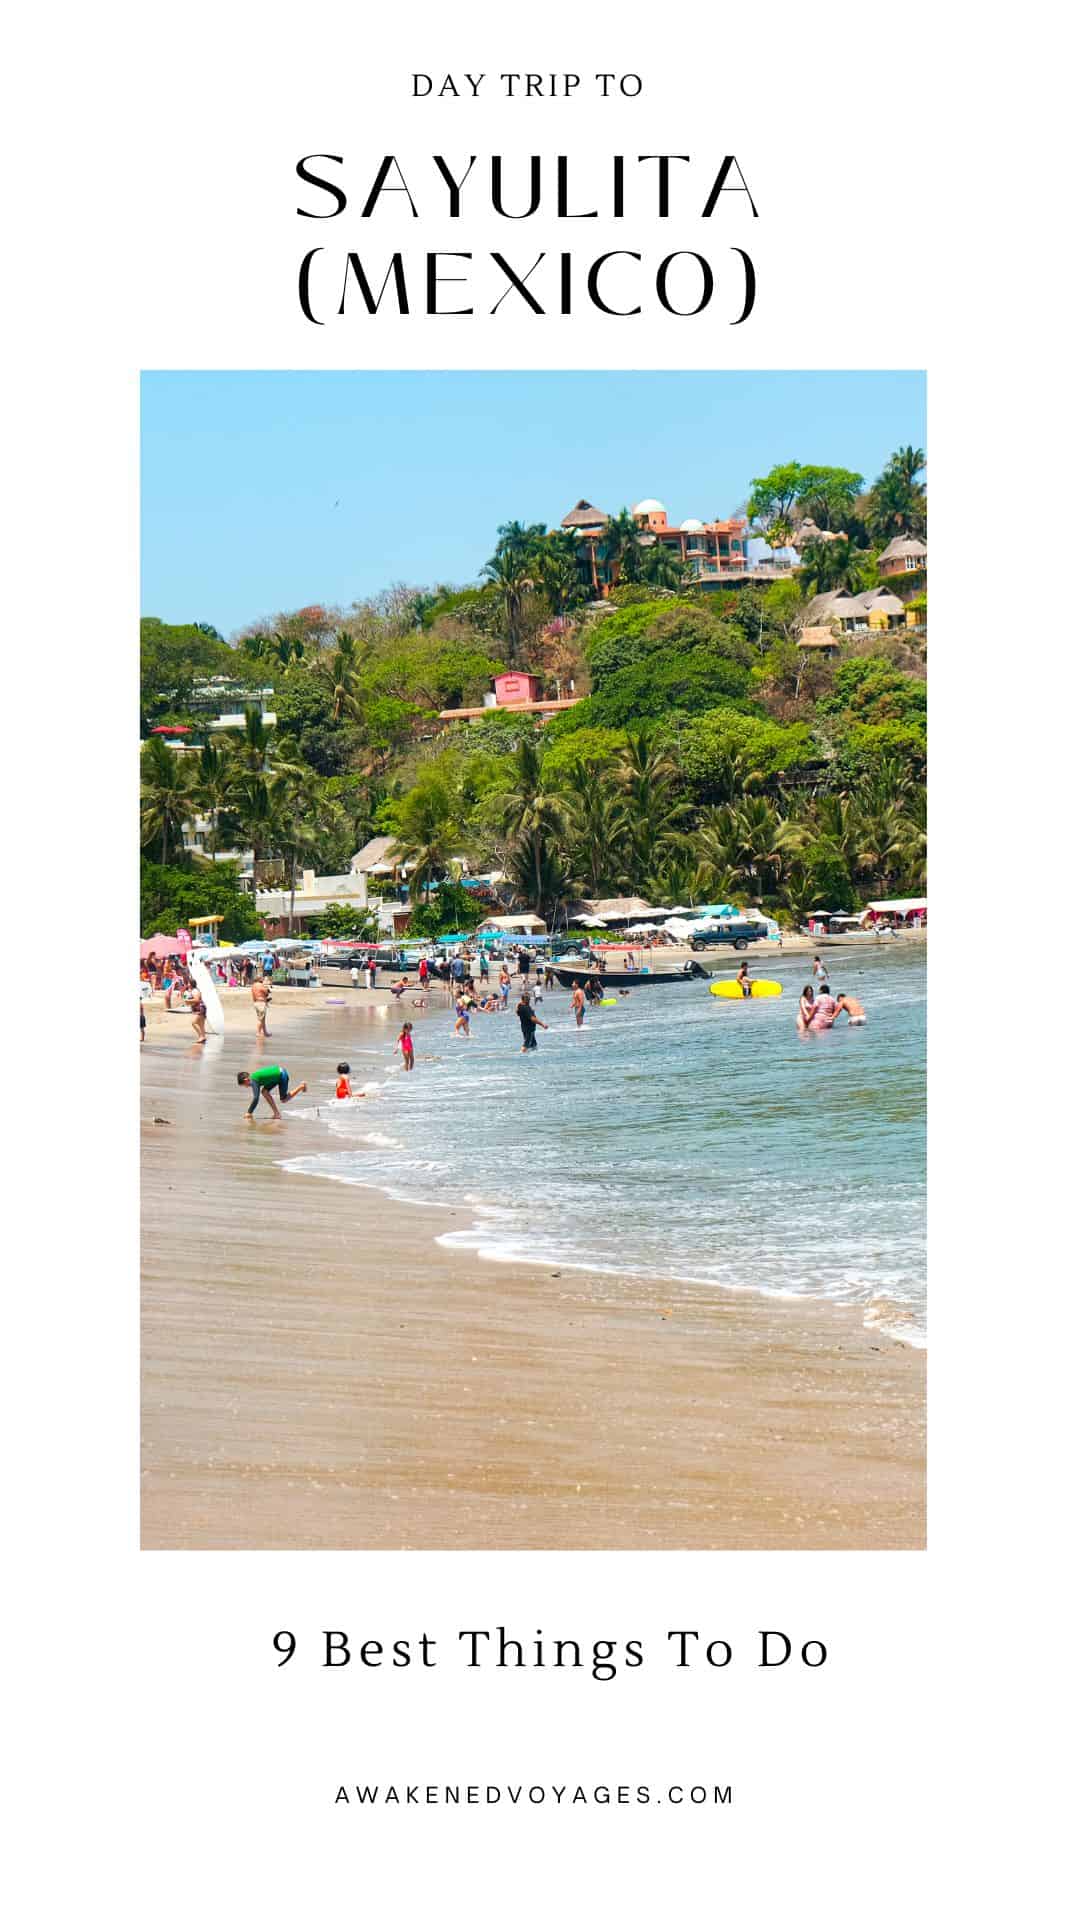 Day trip to Sayulita: 9 best things to do